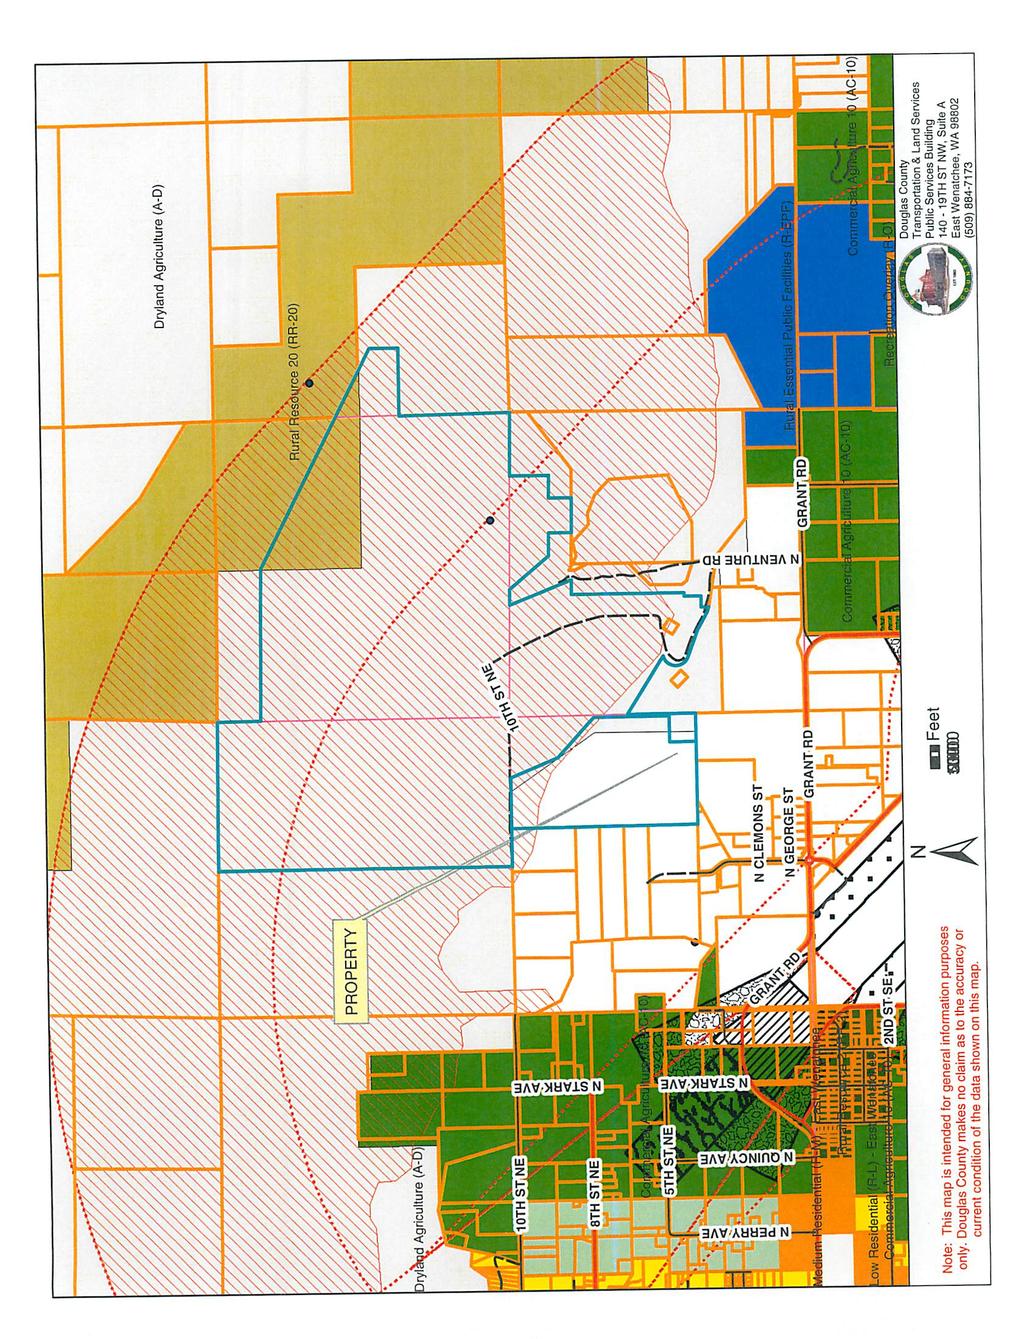 rr7z^////m PROPERTY DrylandAgriculture(A- 10TH STNE 8TH ST NE sth'st.ne iiib ffls Residential Commawt imhei Note; This map is intended for general information purposes only.